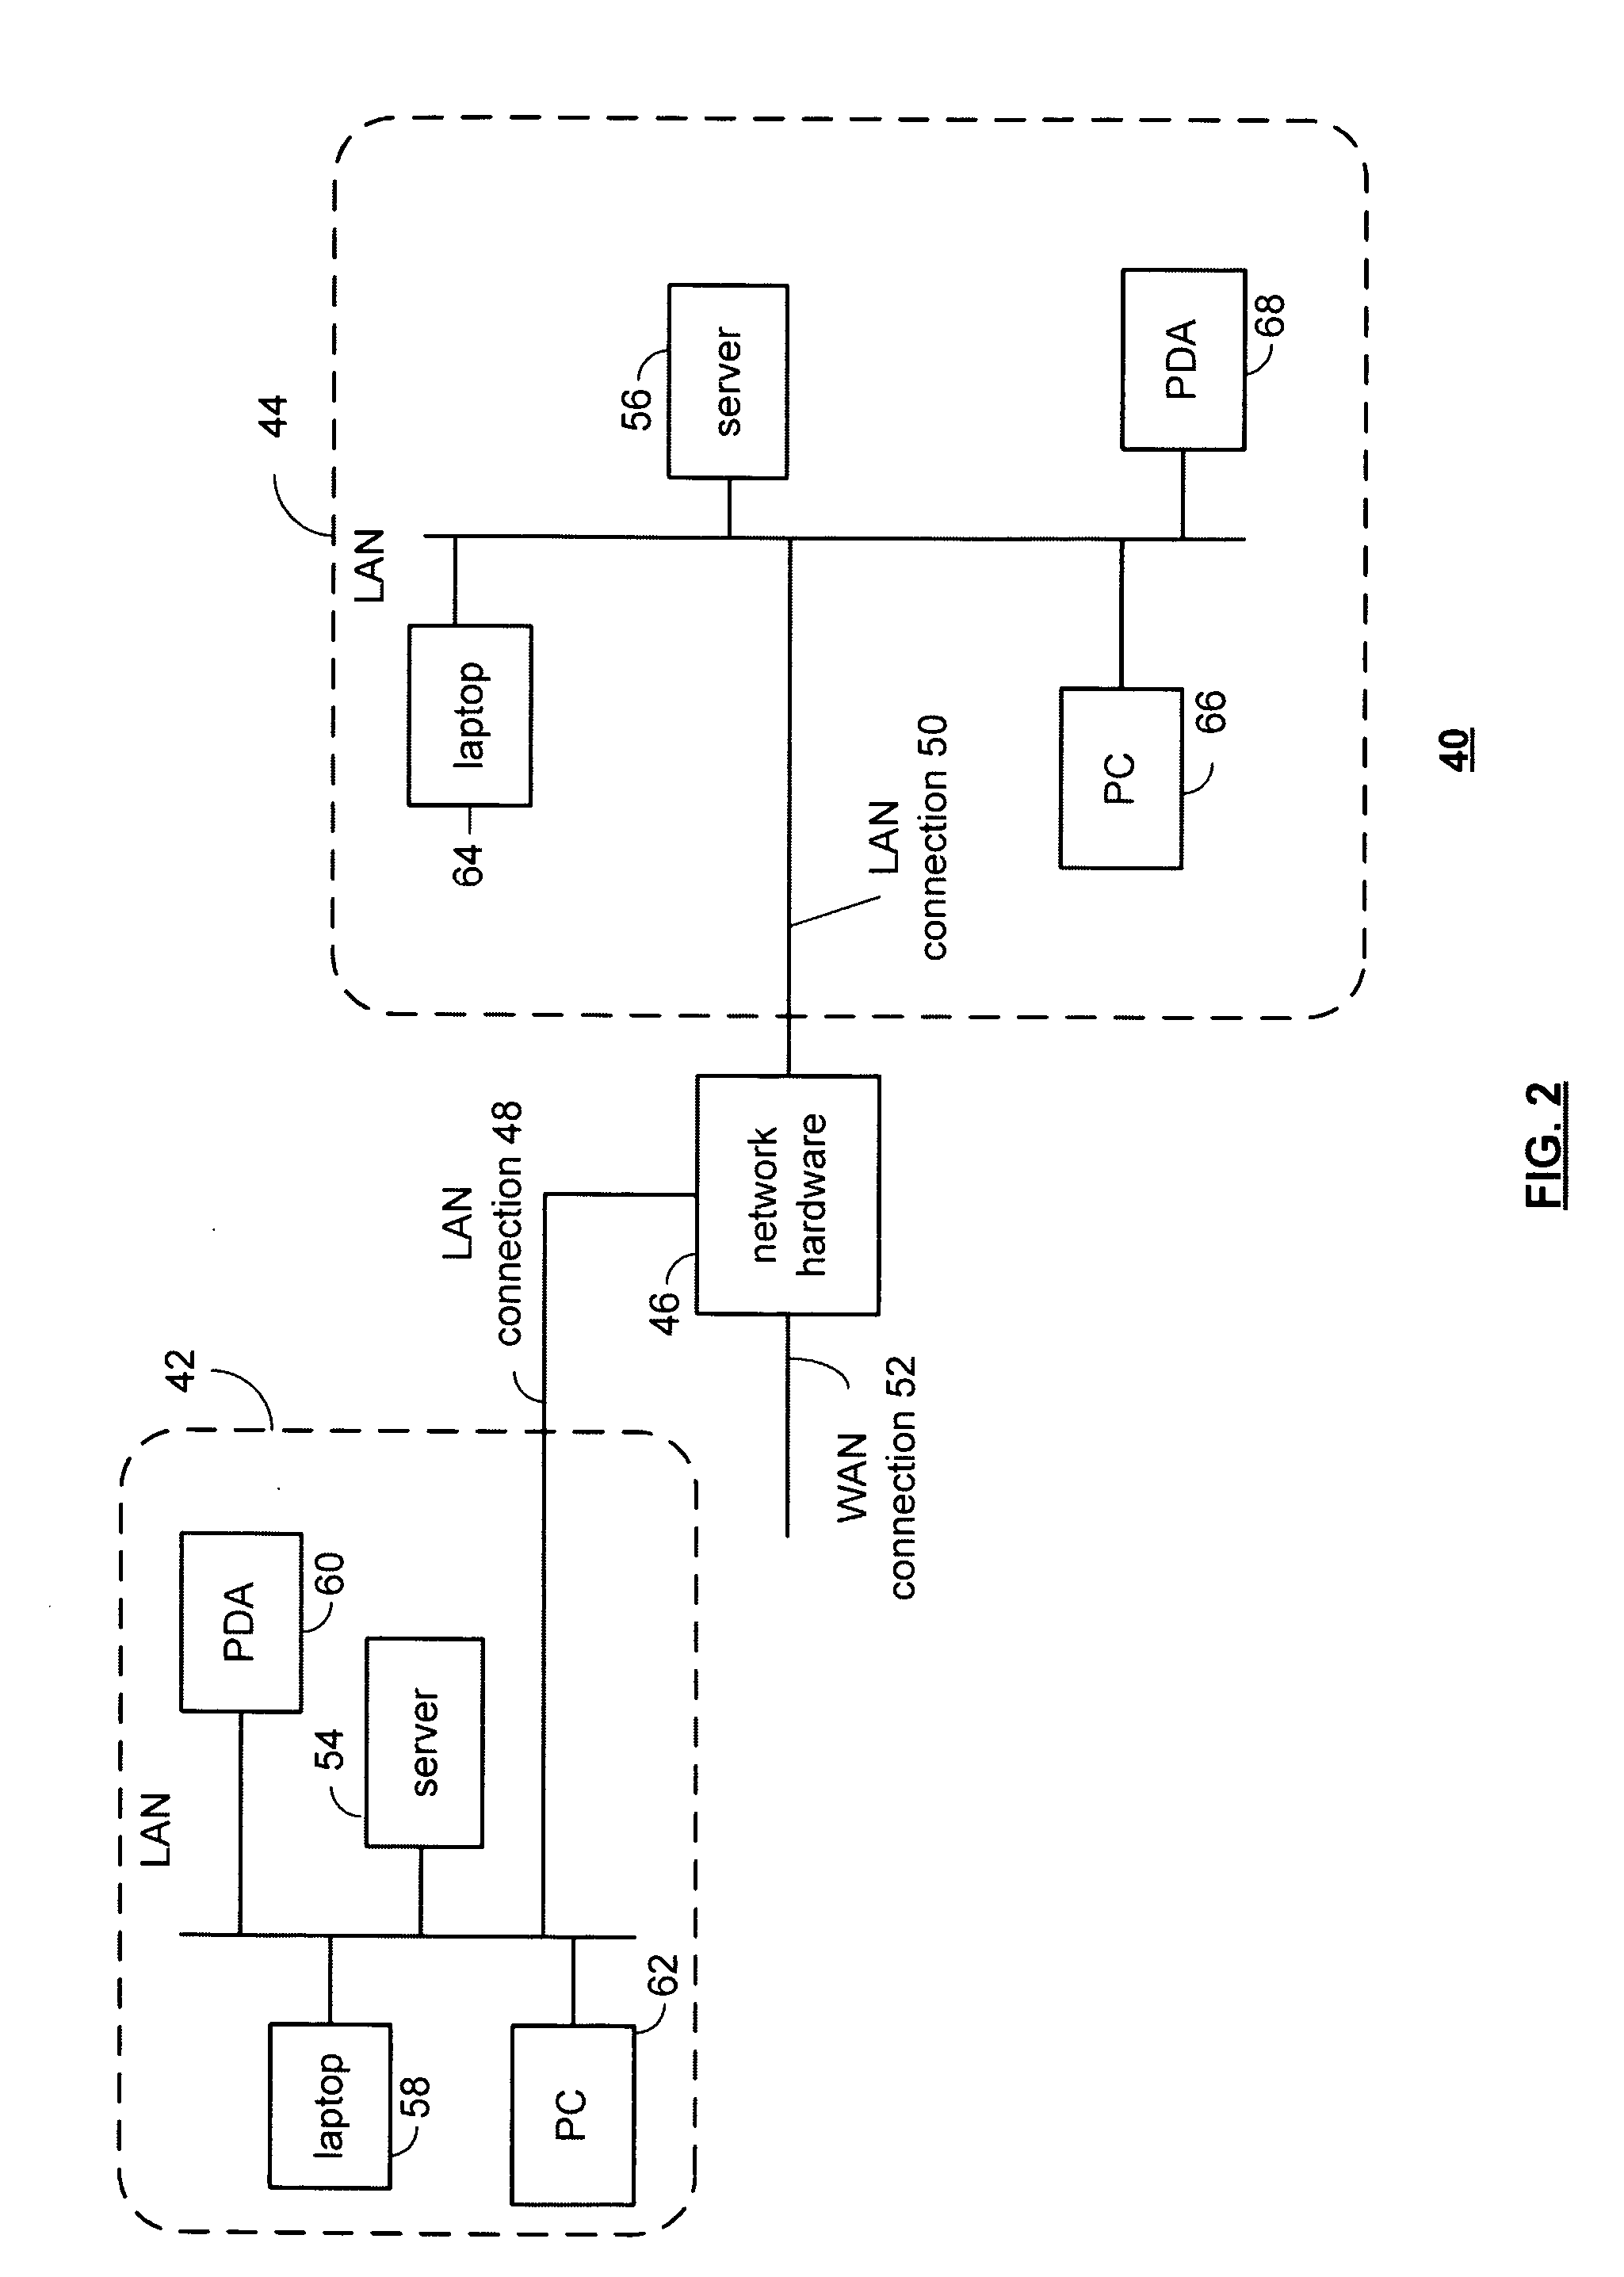 Collision avoidance in multiple protocol communication networks using a shared communication medium